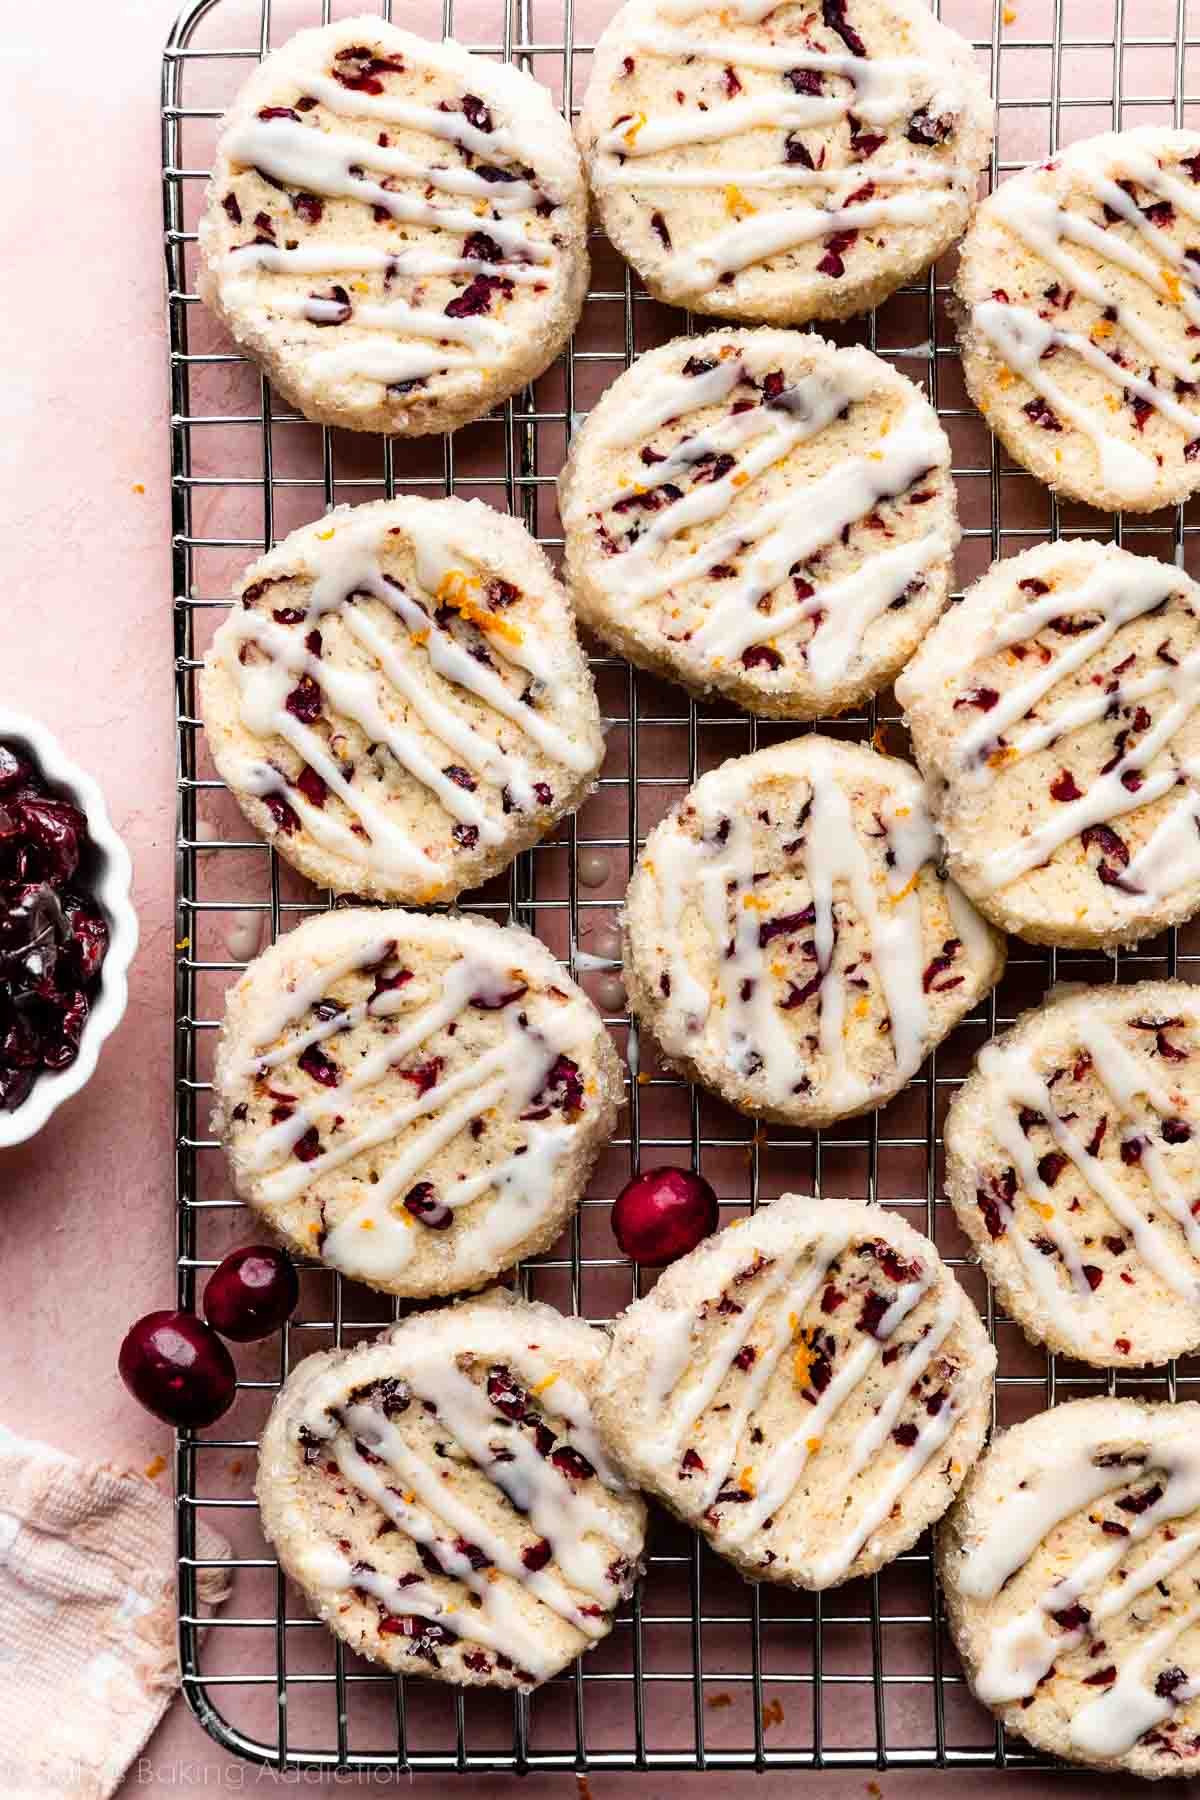 cranberry orange cookies with dried cranberries and orange icing drizzled on top arranged on cooling rack.